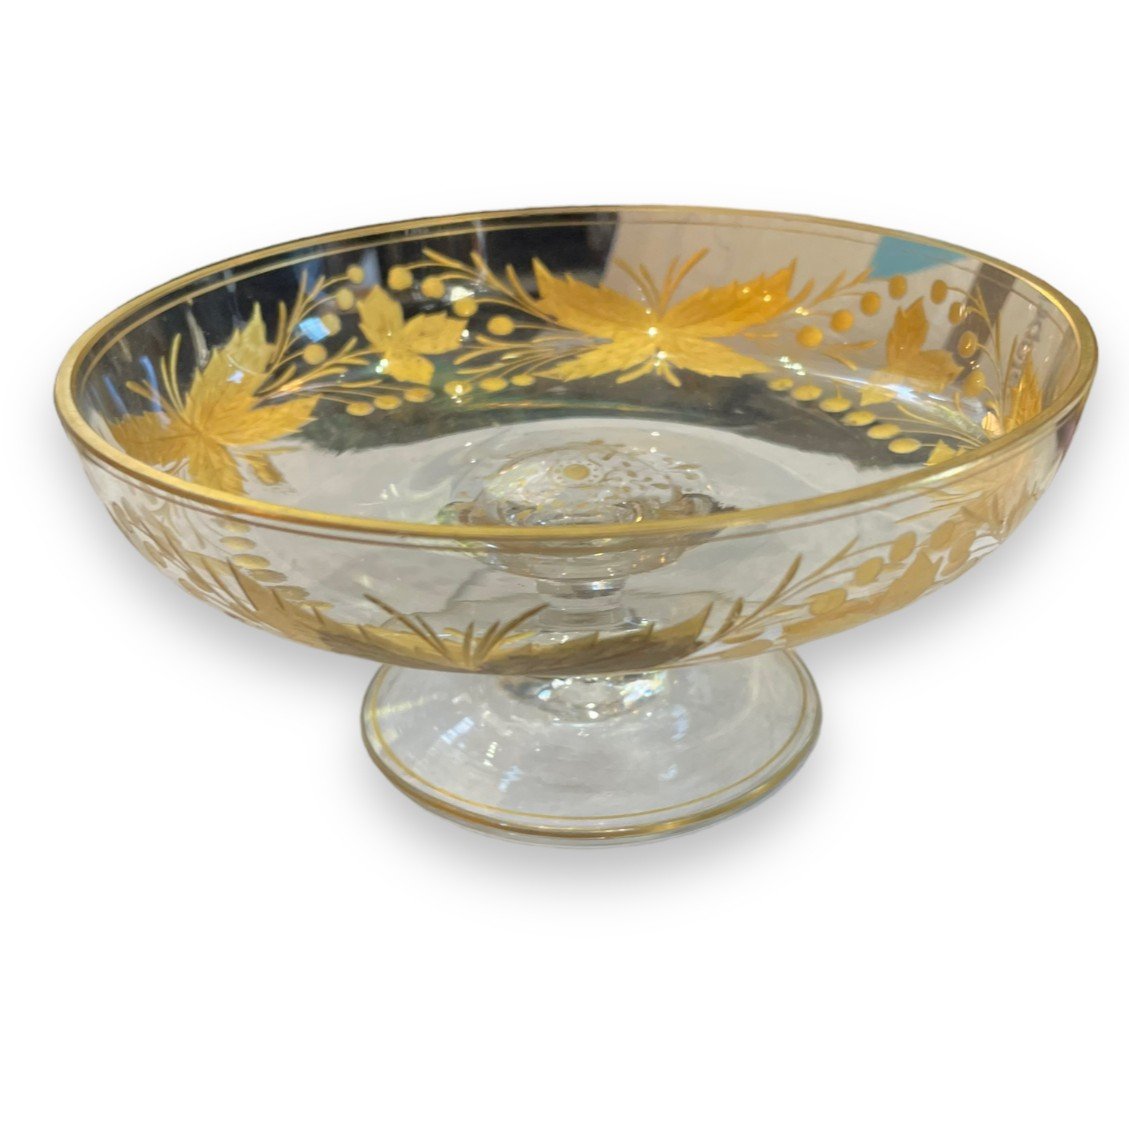 Crystal Bowl With Engraved And Gilded Decor In The Taste Of Saint-louis Coupe